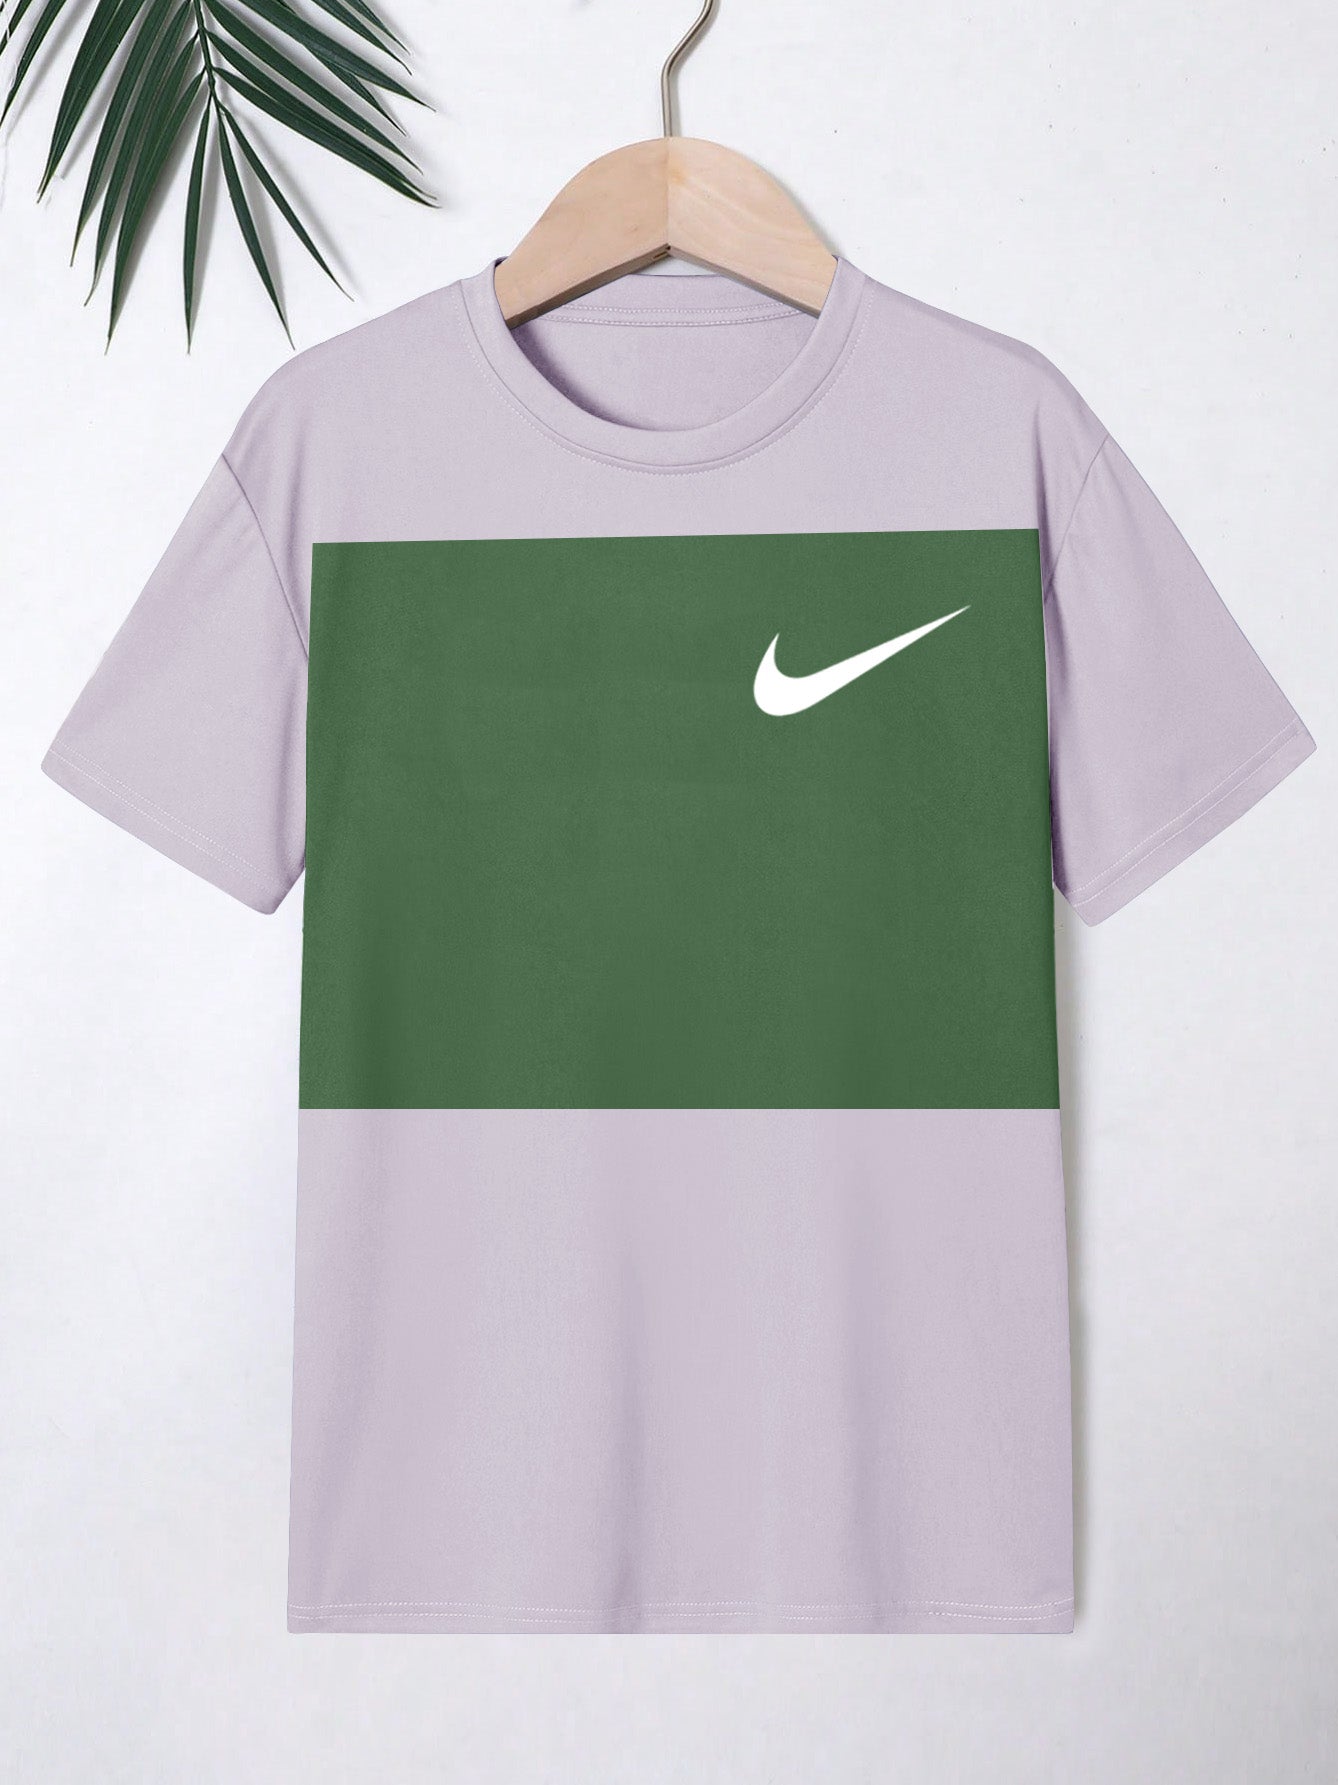 NK Crew Neck Single Jersey Tee Shirt For Kids-Purple with Green Panels-SP2262